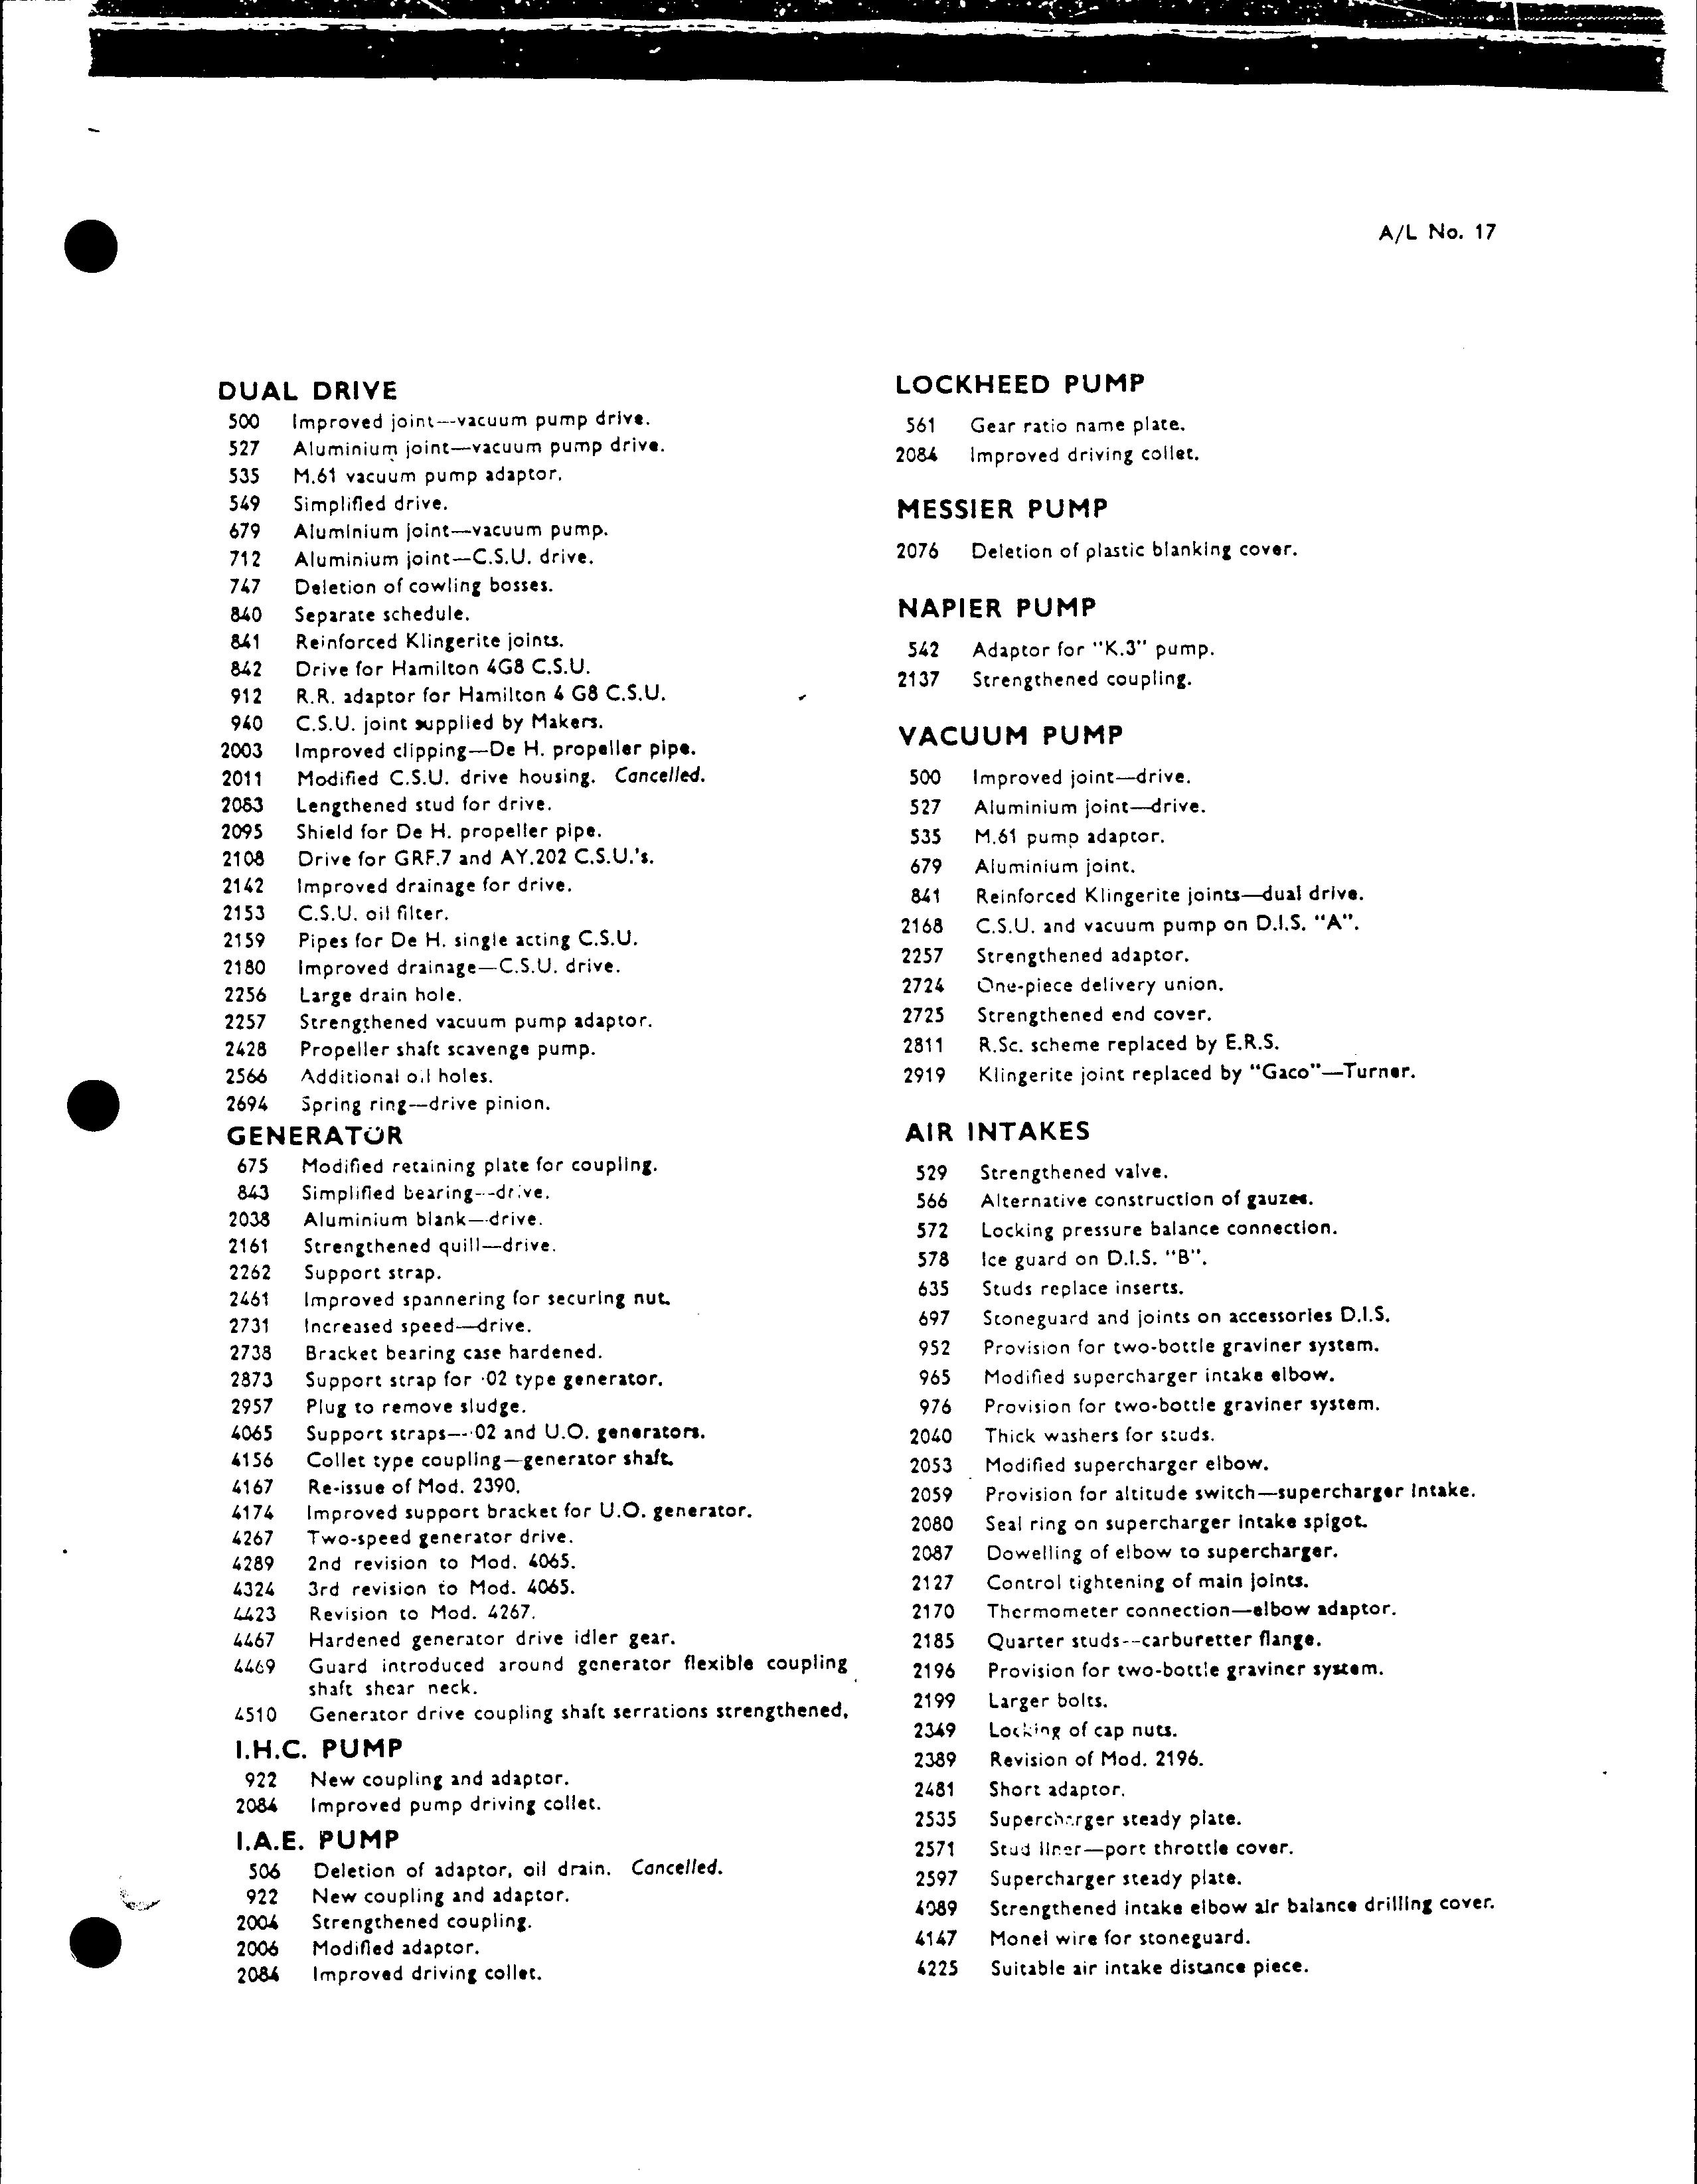 Sample page 12 from AirCorps Library document: Numerical List of Modifications to Rolls Royce Merlin Engines